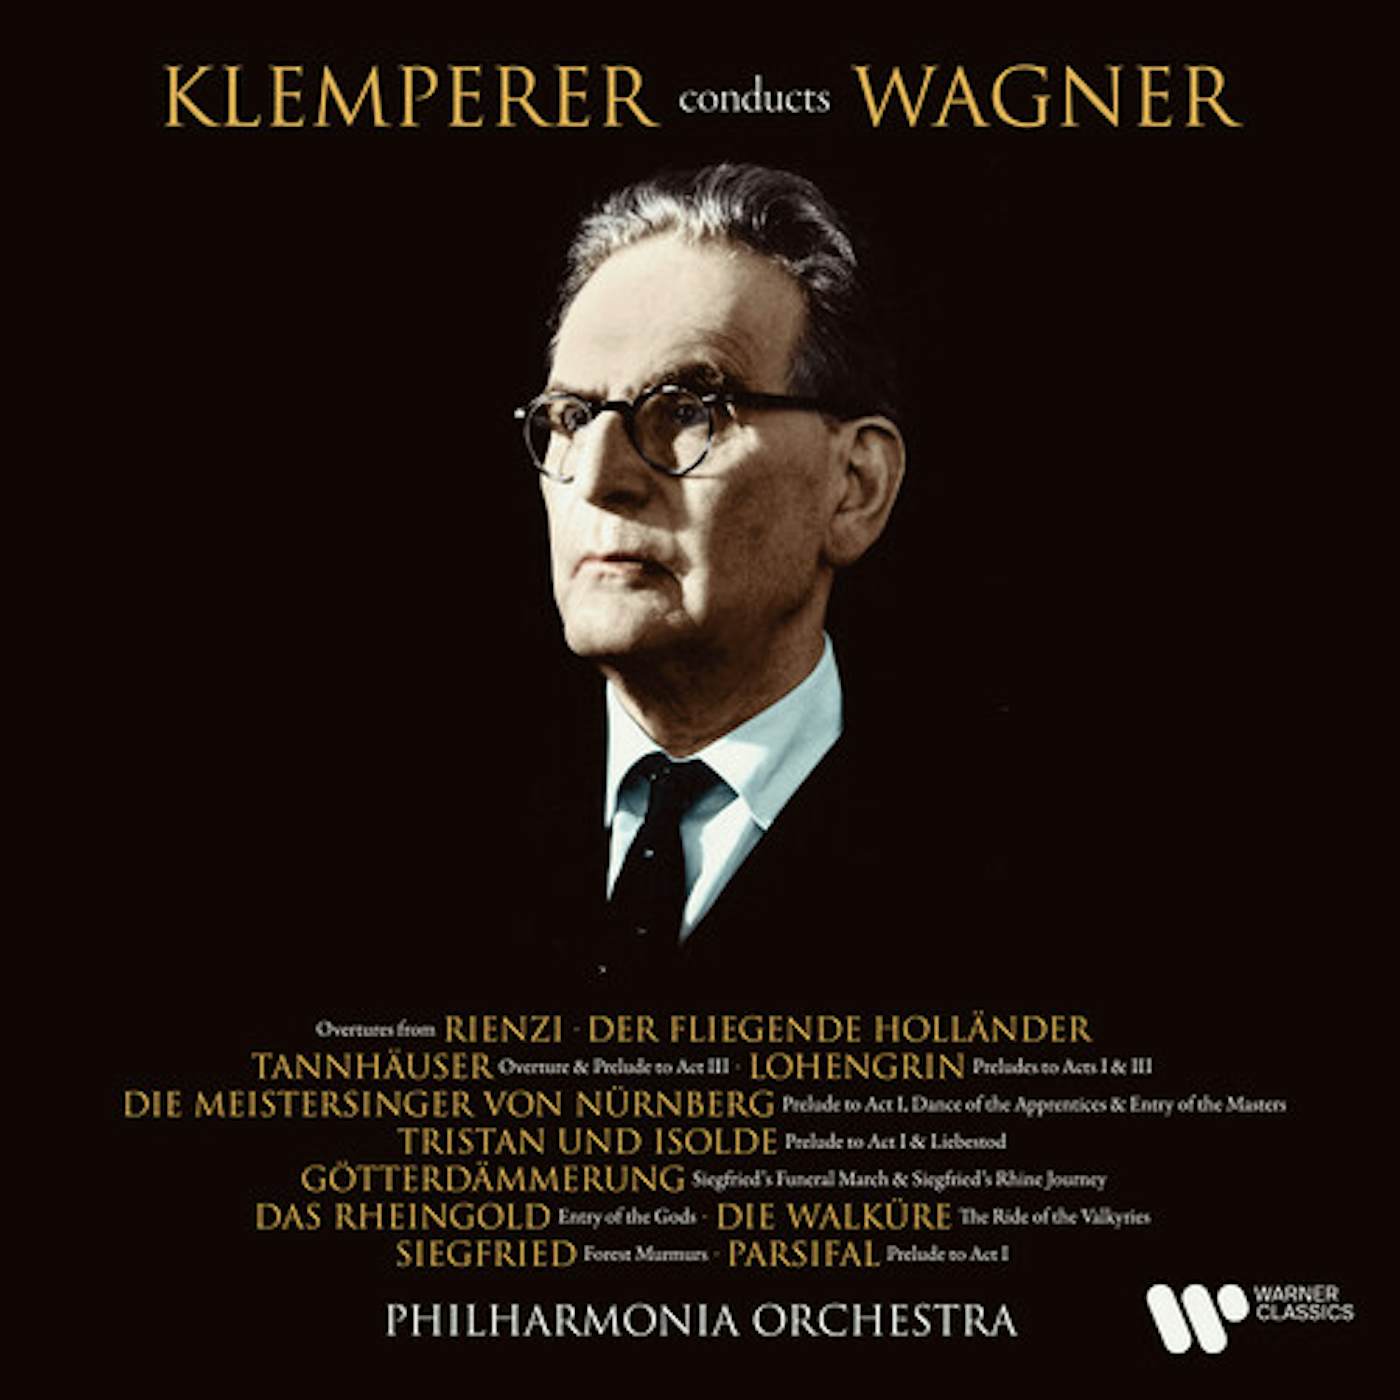 Otto Klemperer WAGNER: ORCHESTRAL MUSIC - KLEMPERER CONDUCTS Vinyl Record